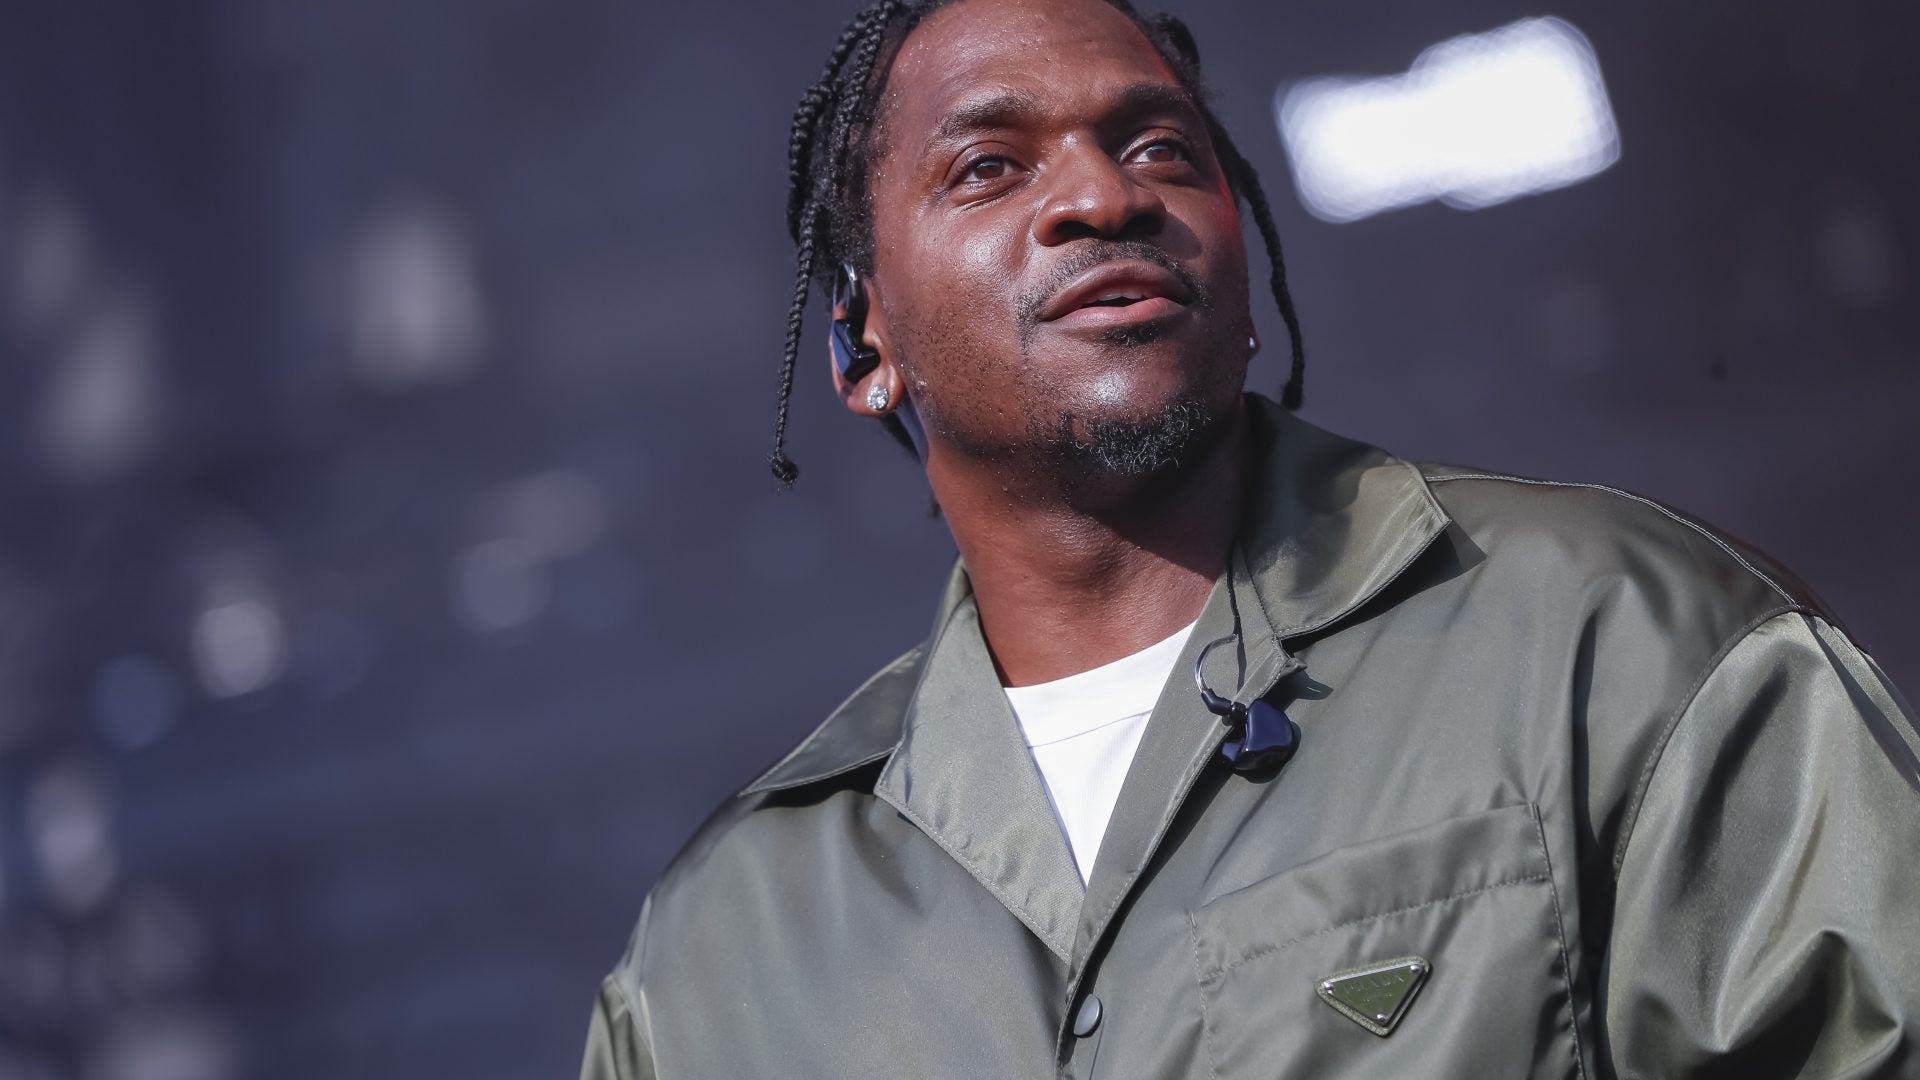 Pusha T Joins Remix Of Award-Winning Theme Song Of HBO's ‘Succession’